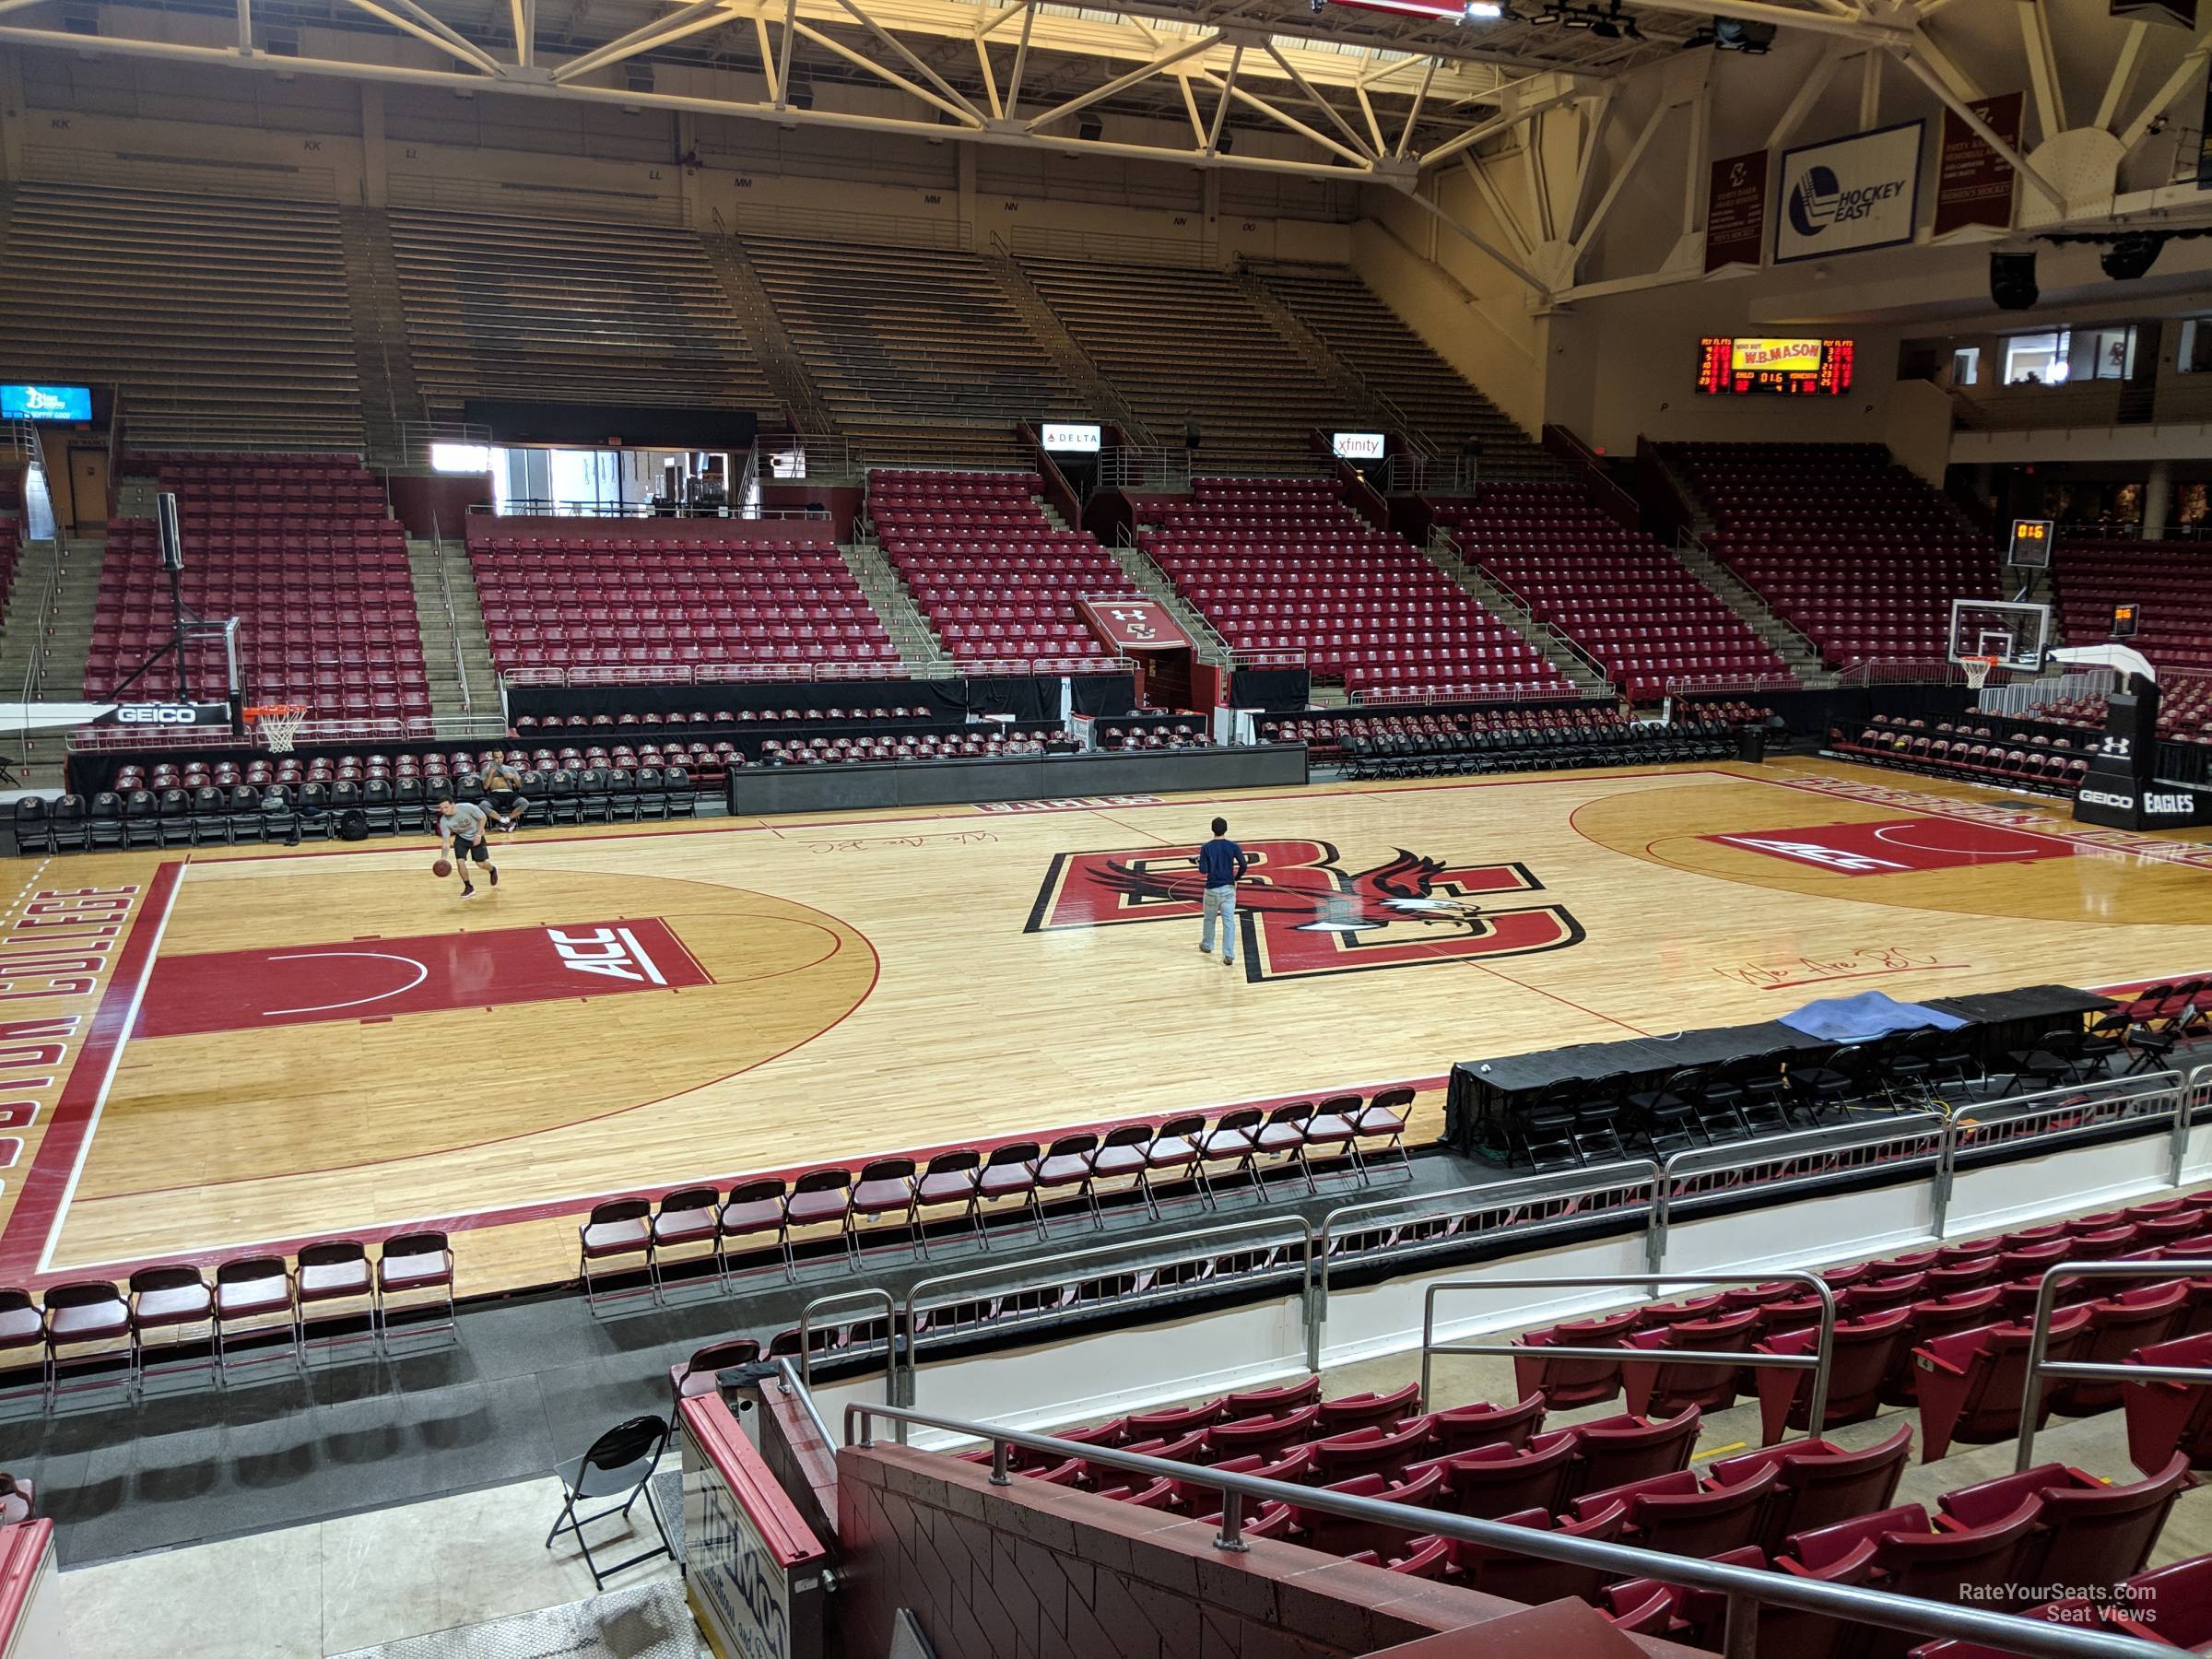 section b, row 10 seat view  - conte forum